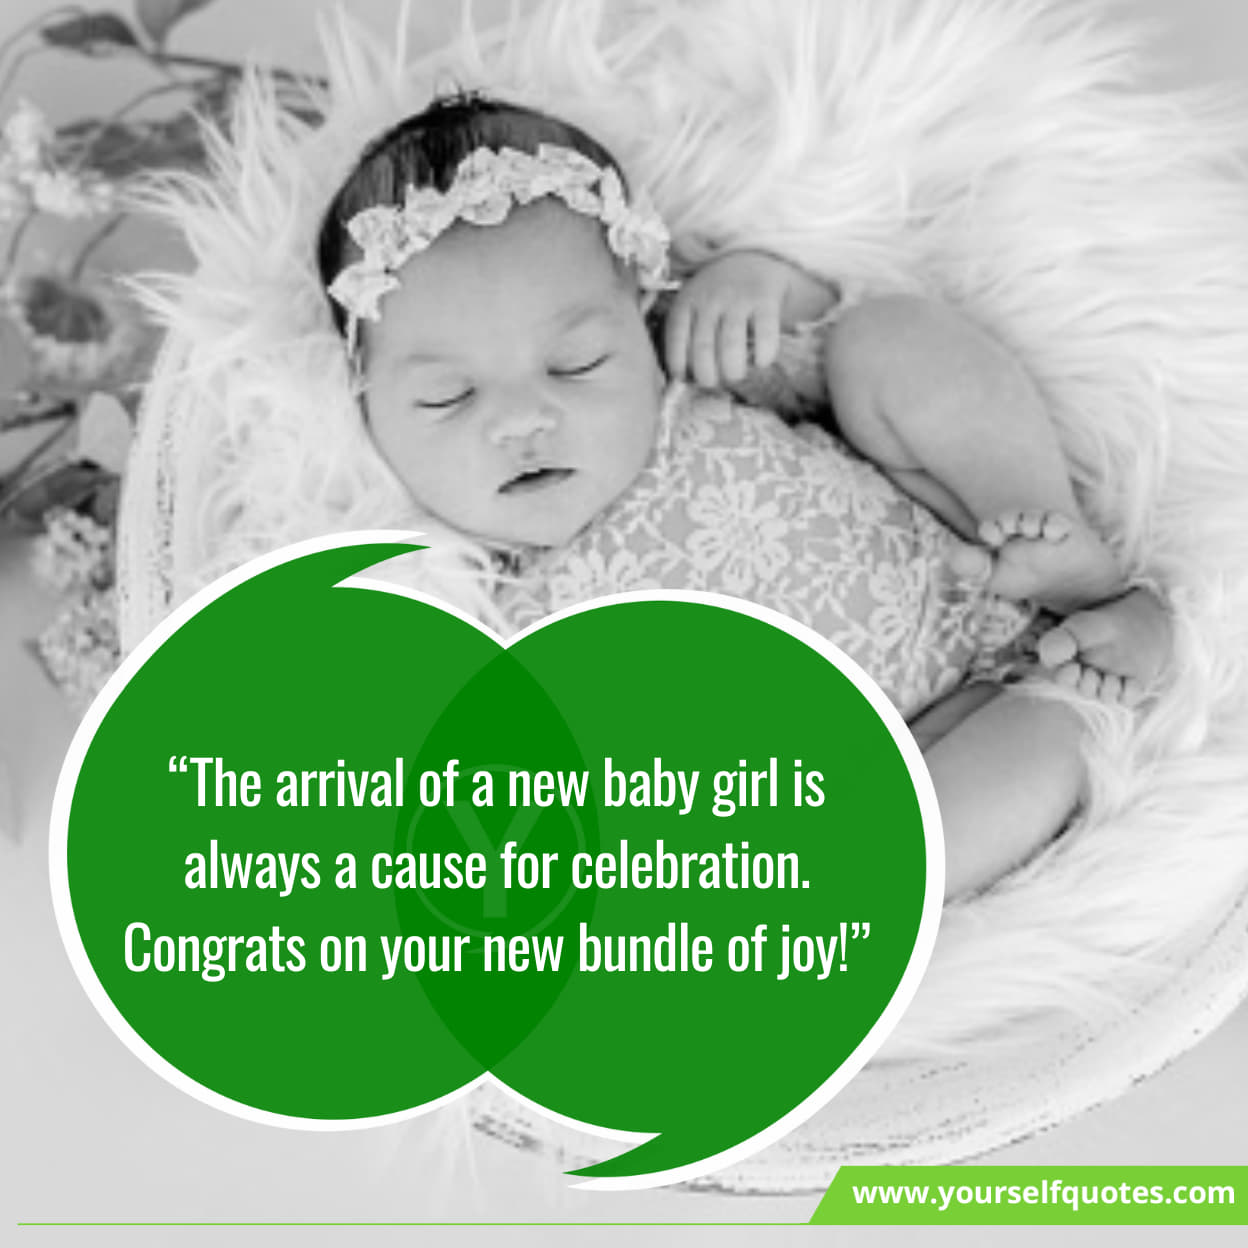 Unique Congratulations Messages For New Baby Girl